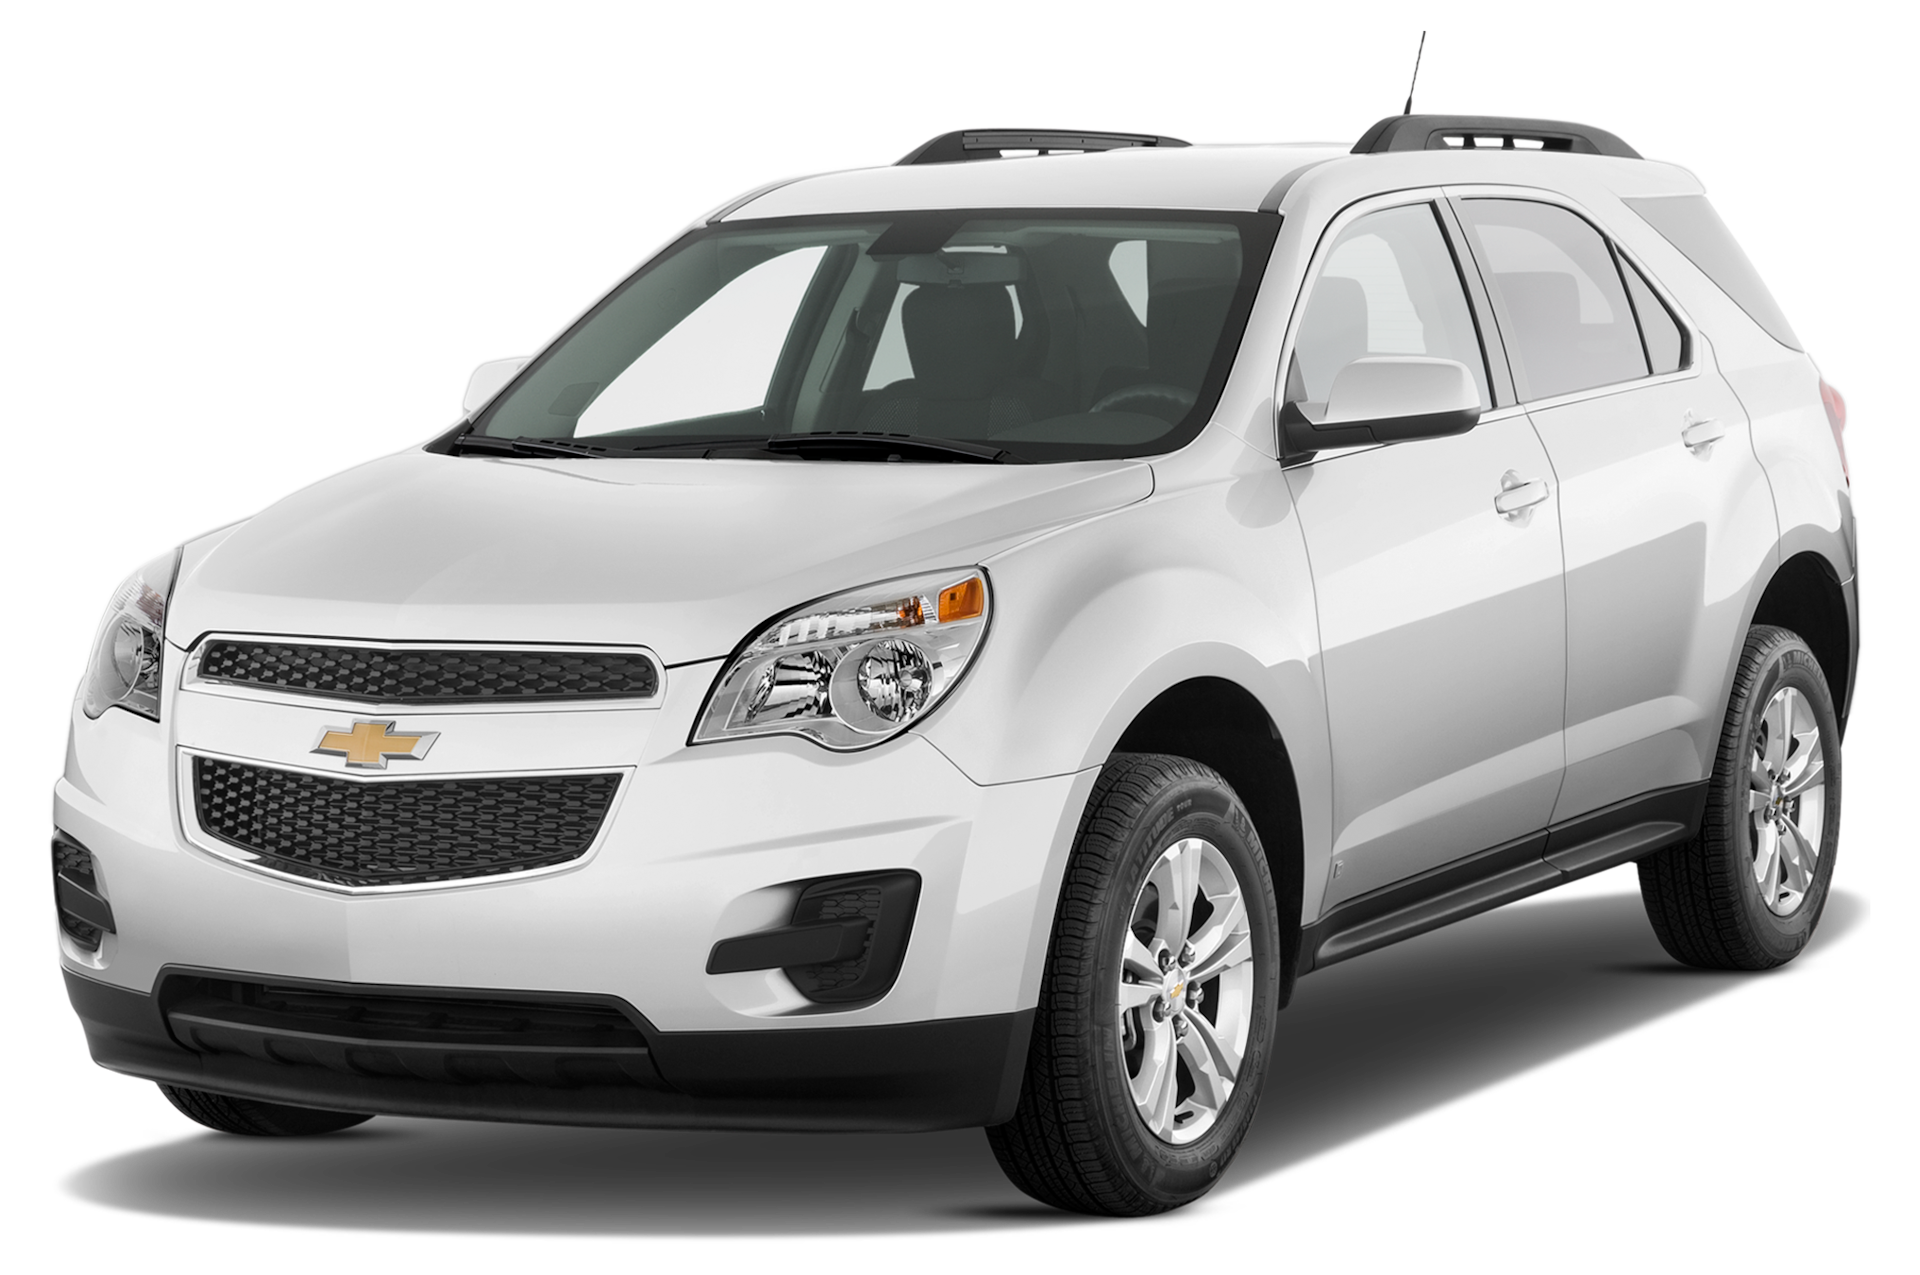 2013 Chevrolet Equinox Prices, Reviews, and Photos - MotorTrend